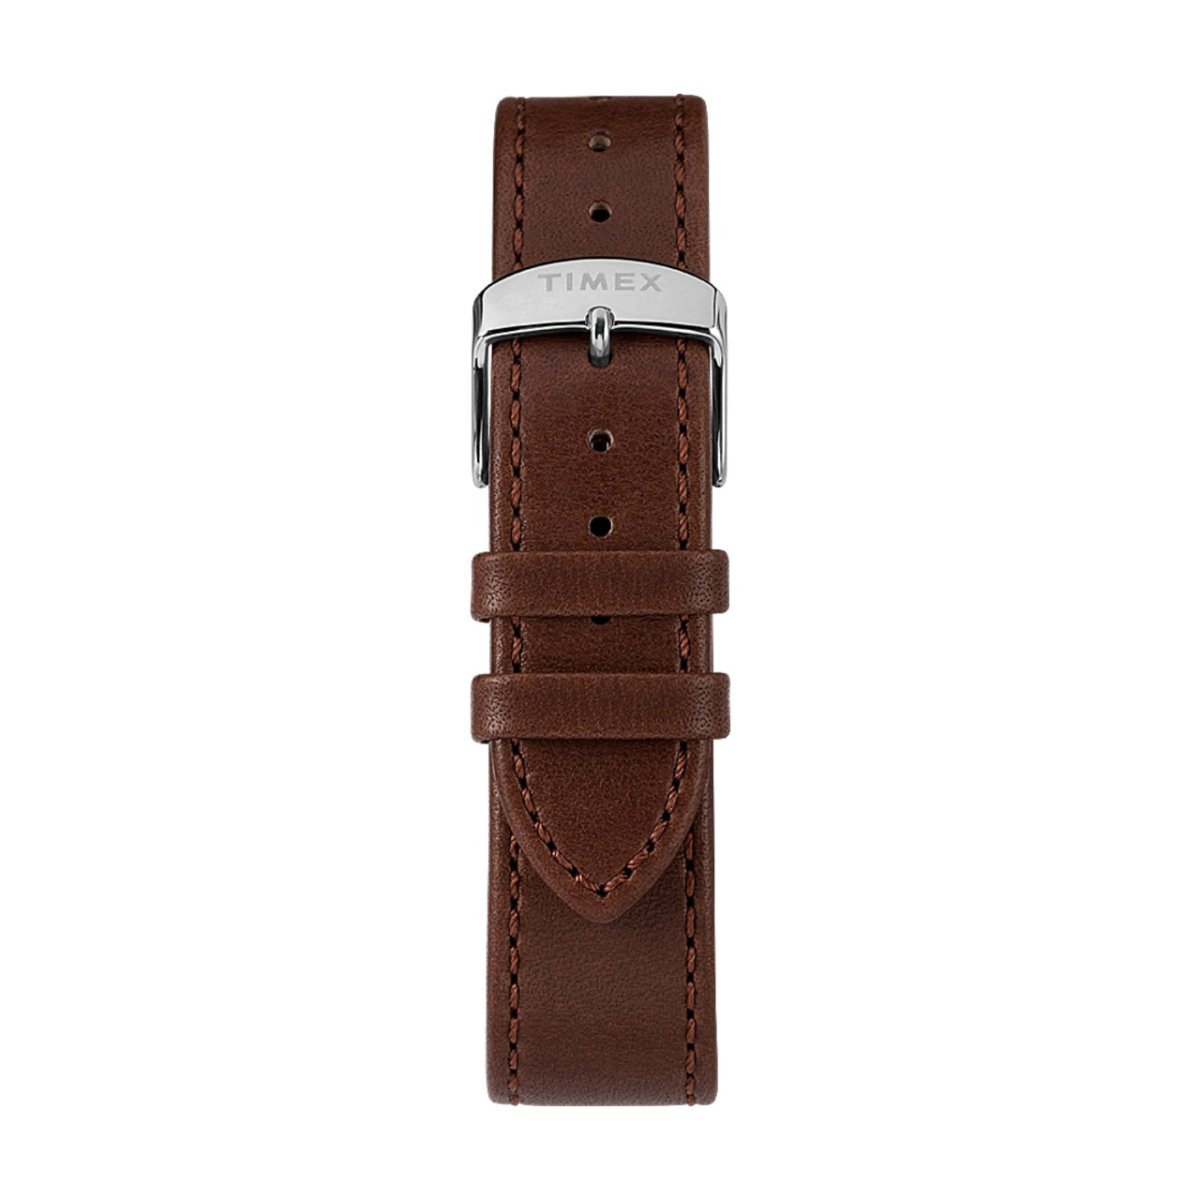 Timex Archive Marlin Automatic 40mm Leather Strap (Braun / Silber)  - Allike Store